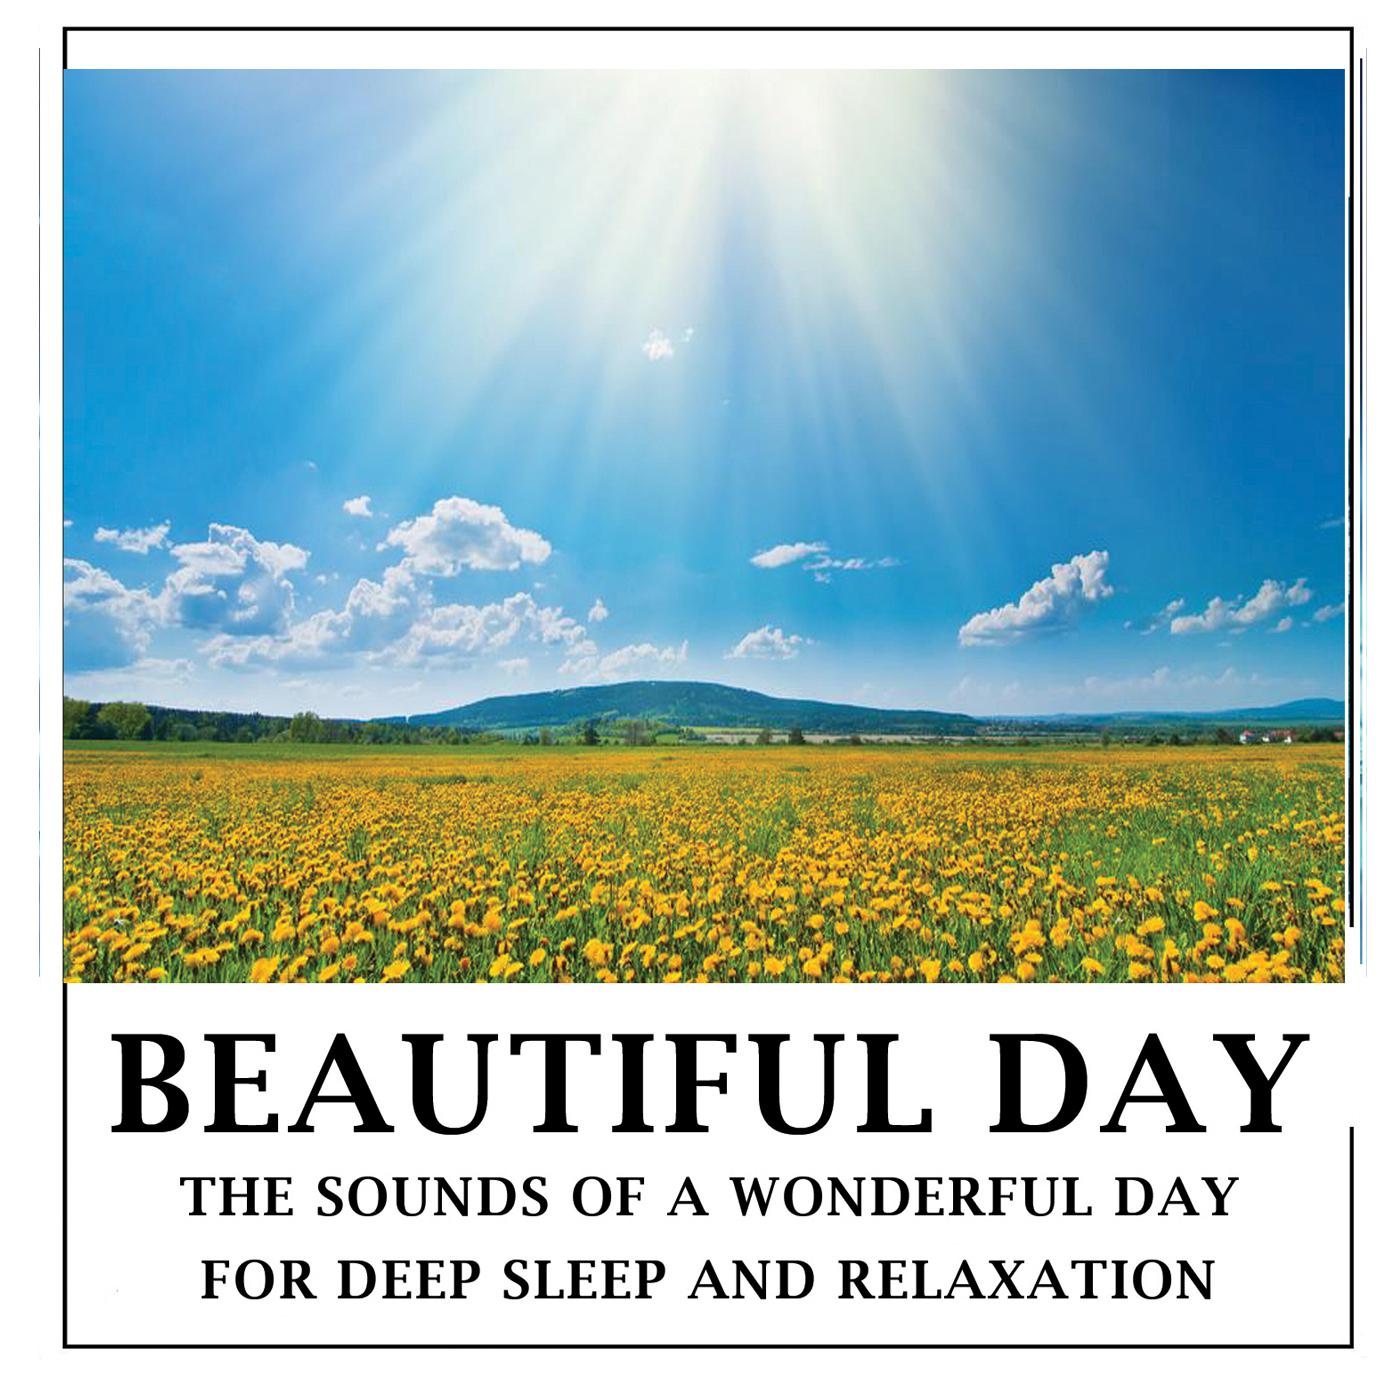 Beautiful Day -Pure sounds of nature for relaxation,deep sleep and meditation